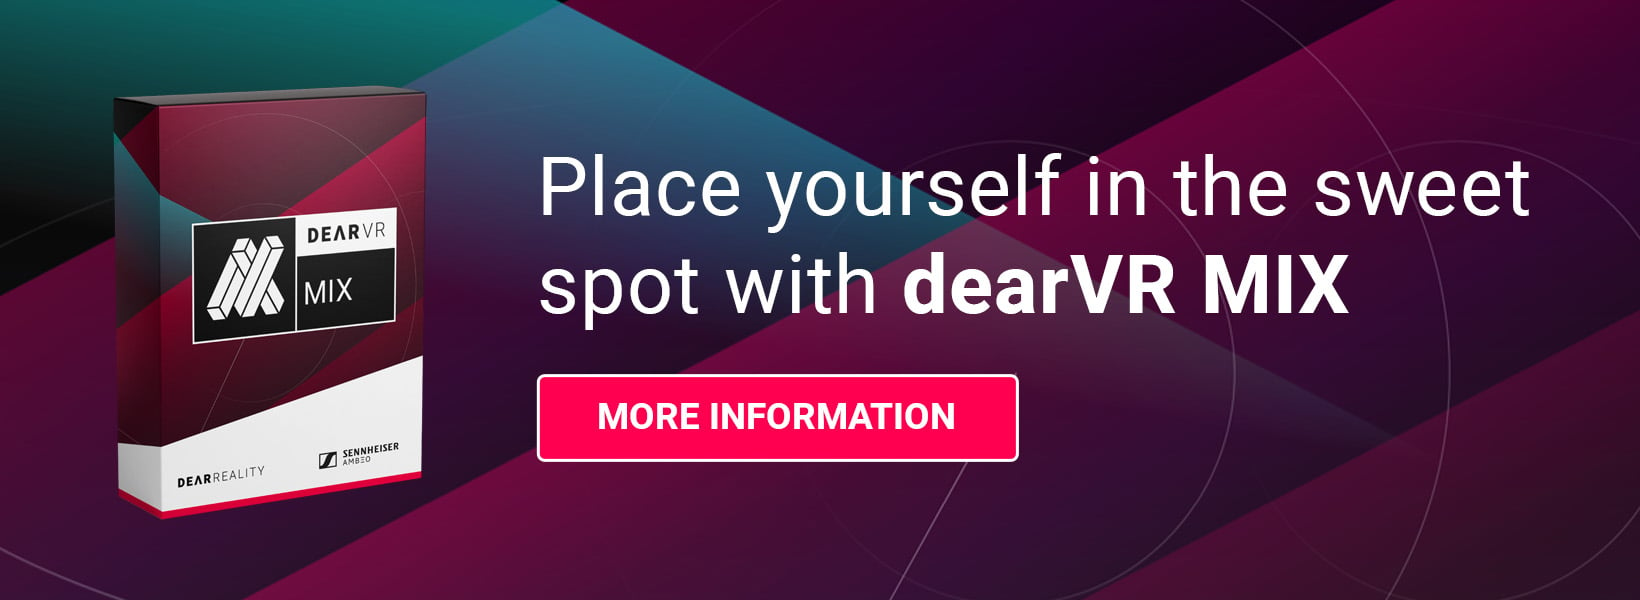 Place yourself in the sweet spot with dearVR MIX. 